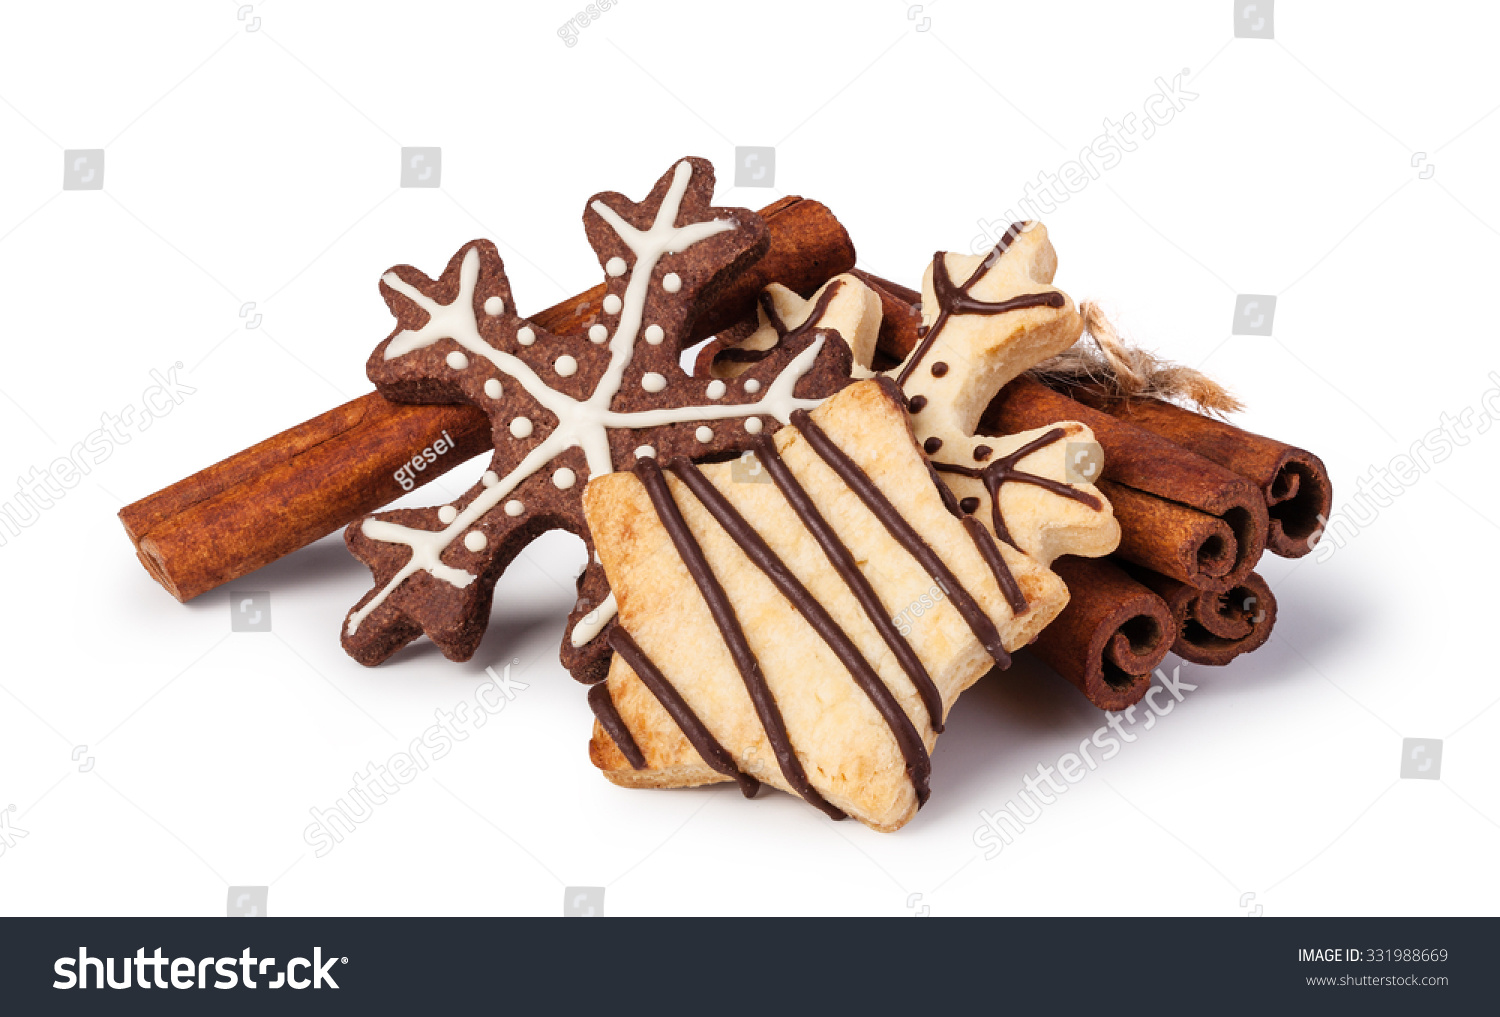 Homemade christmas cookies on wooden table, isolated on white background #331988669